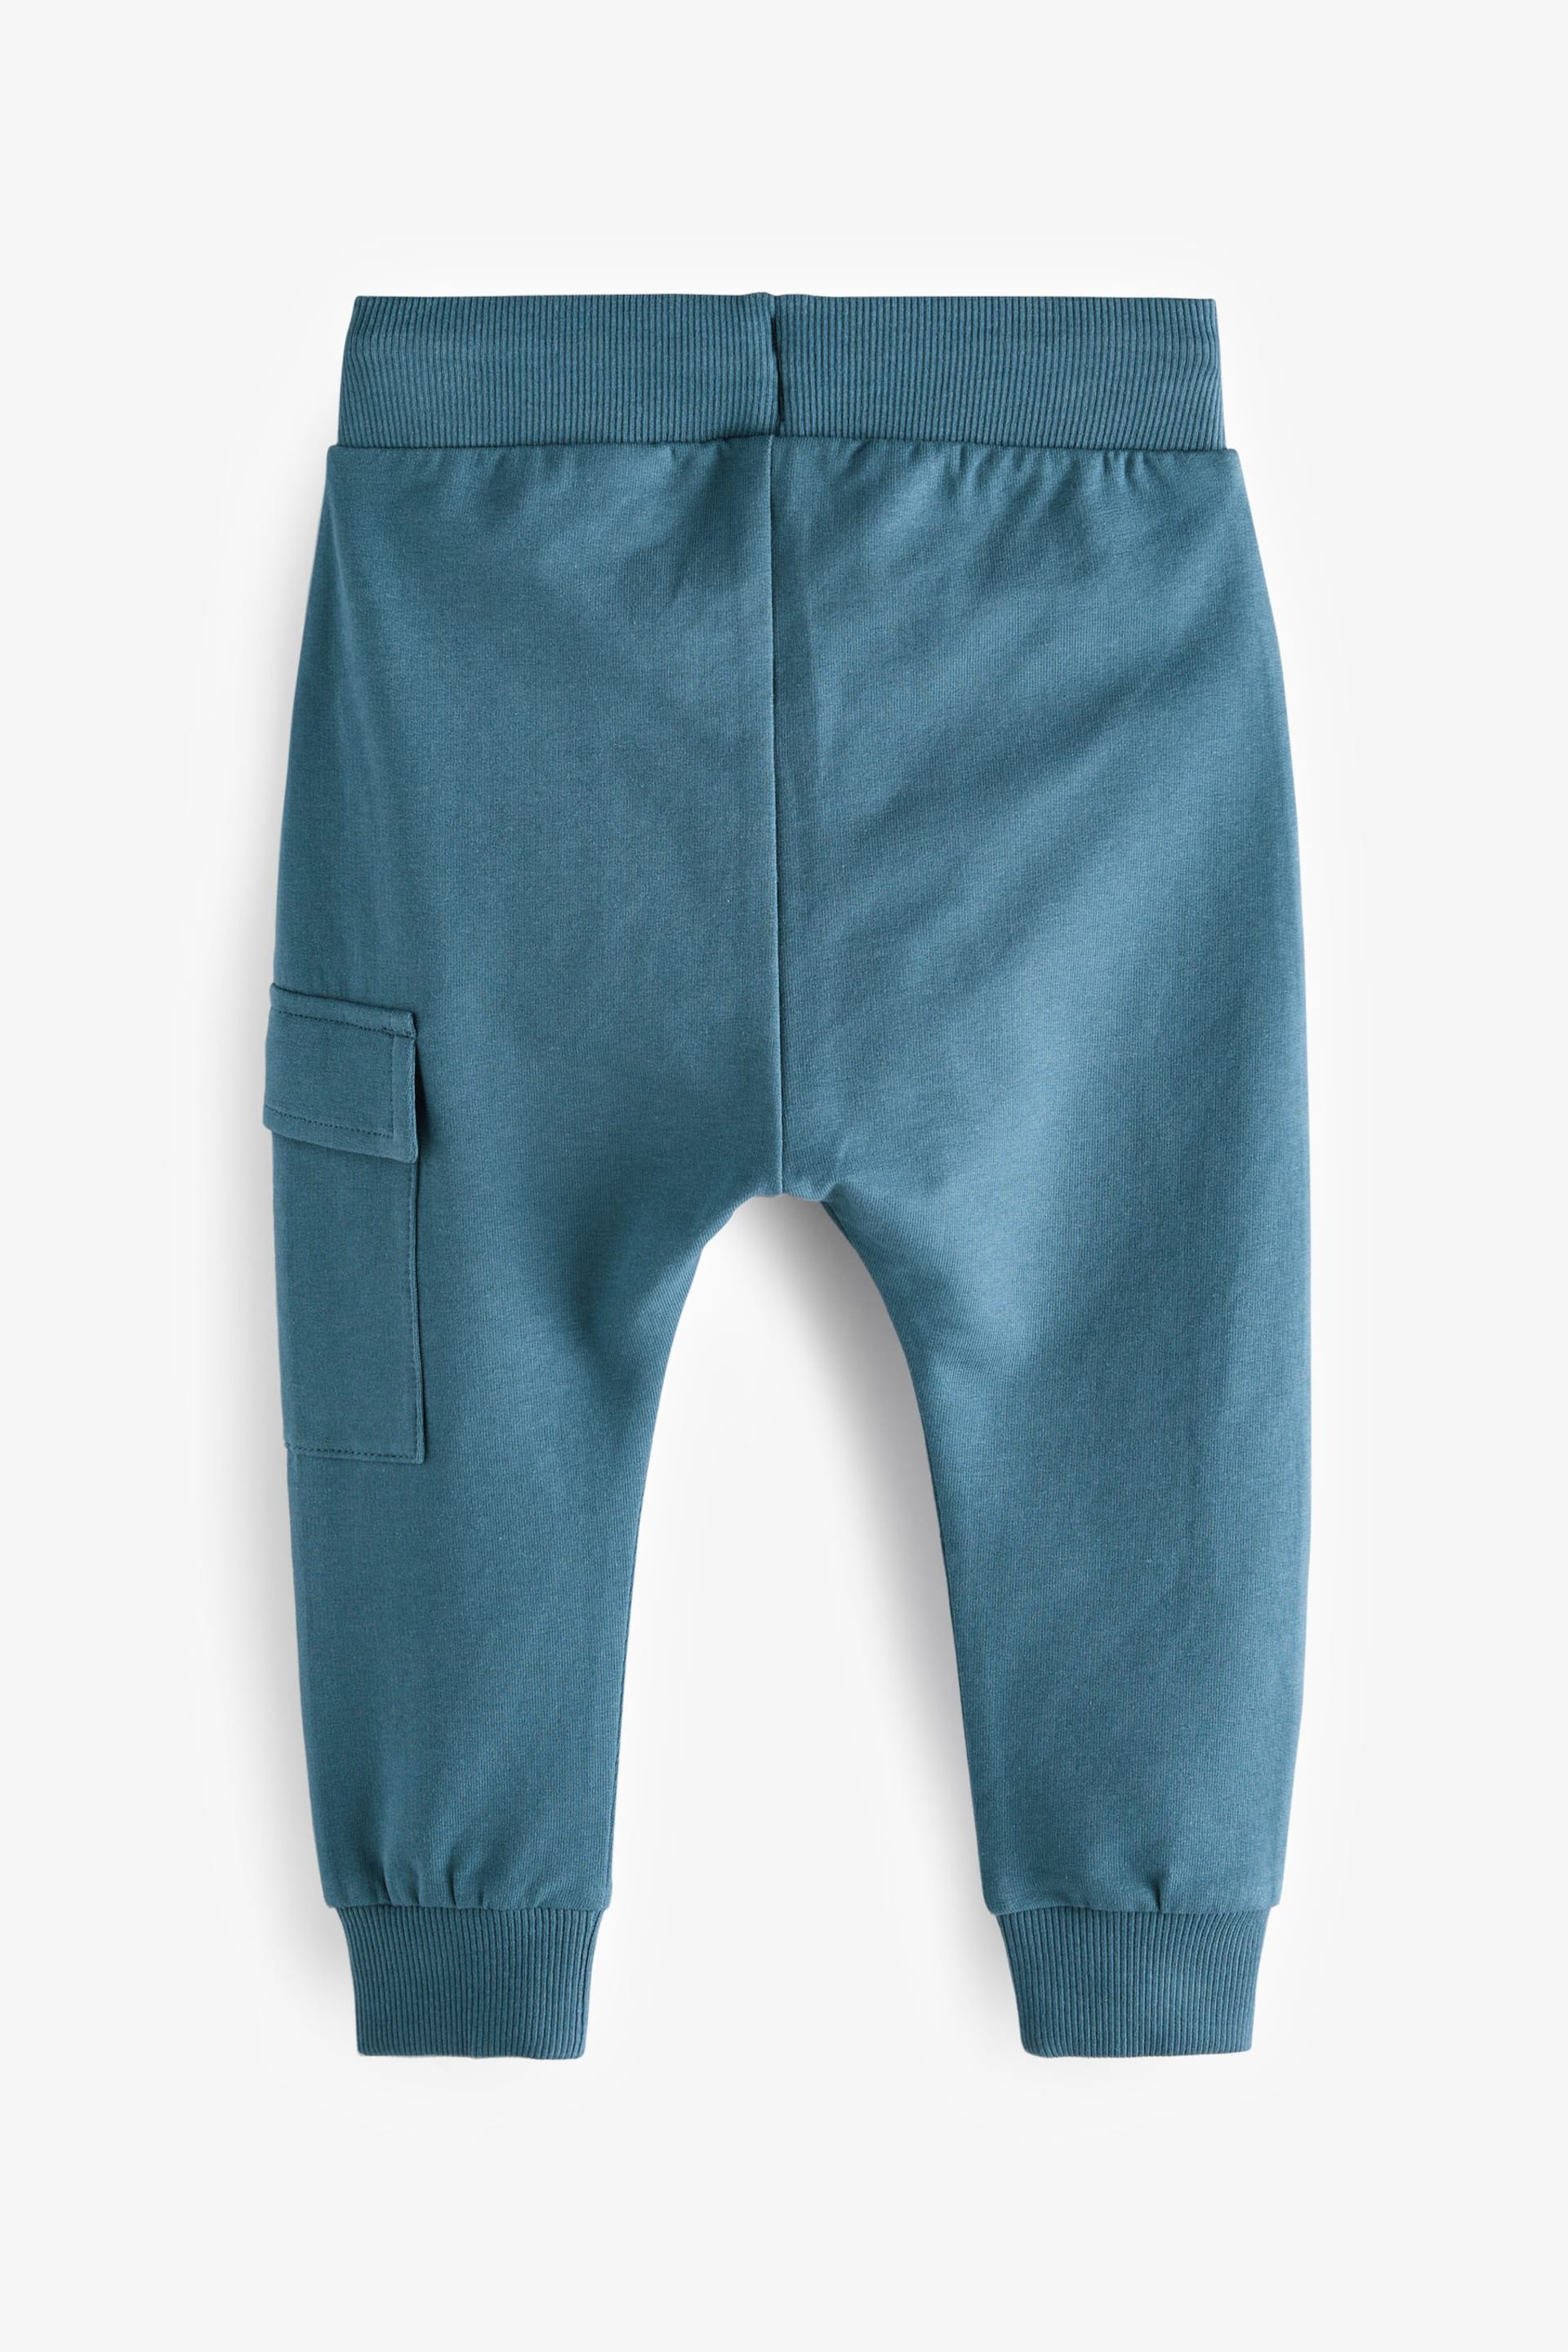 Blue Super Skinny Utility Joggers 3 Pack (3mths-7yrs) - Image 2 of 3